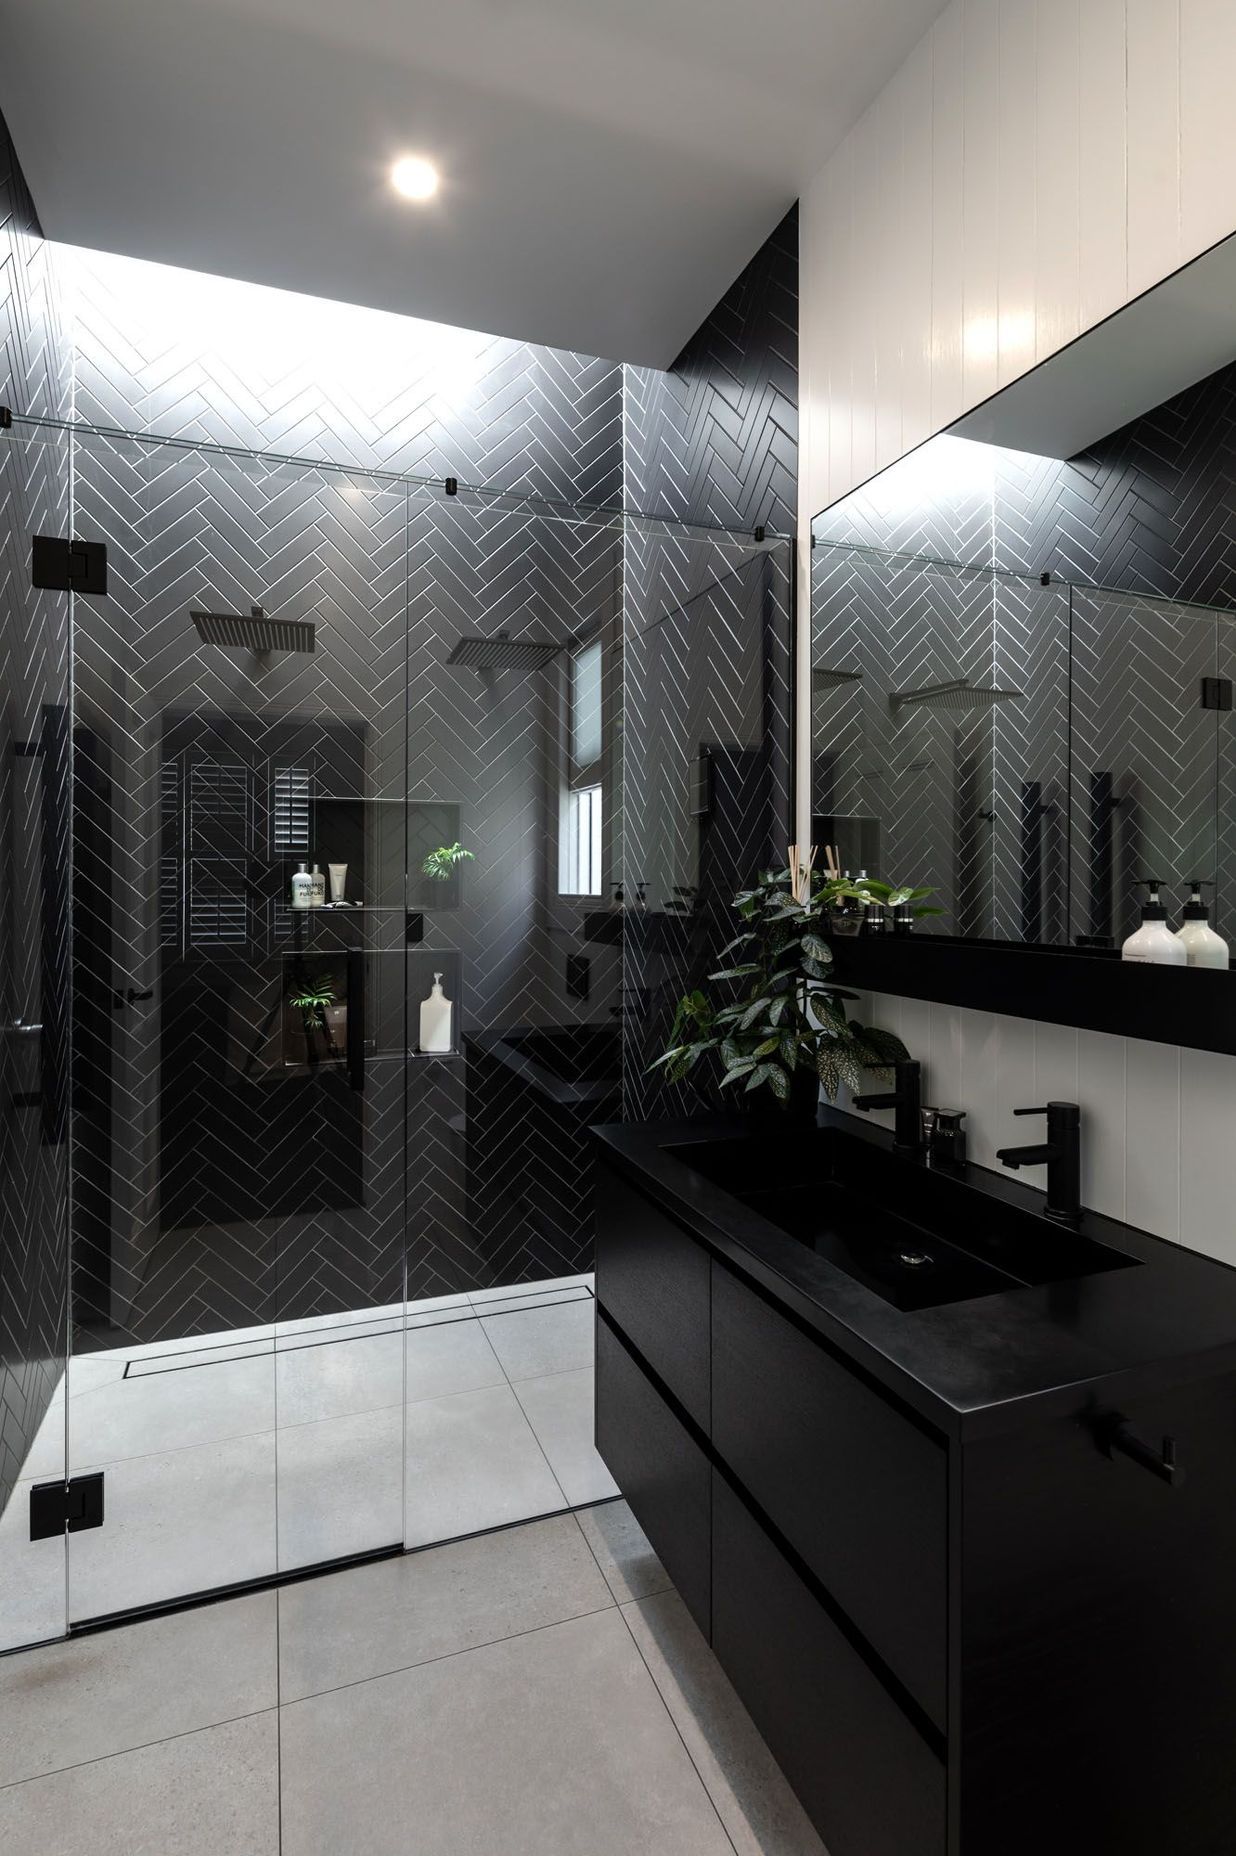 The black and white colour scheme is fully realised in the bathrooms.